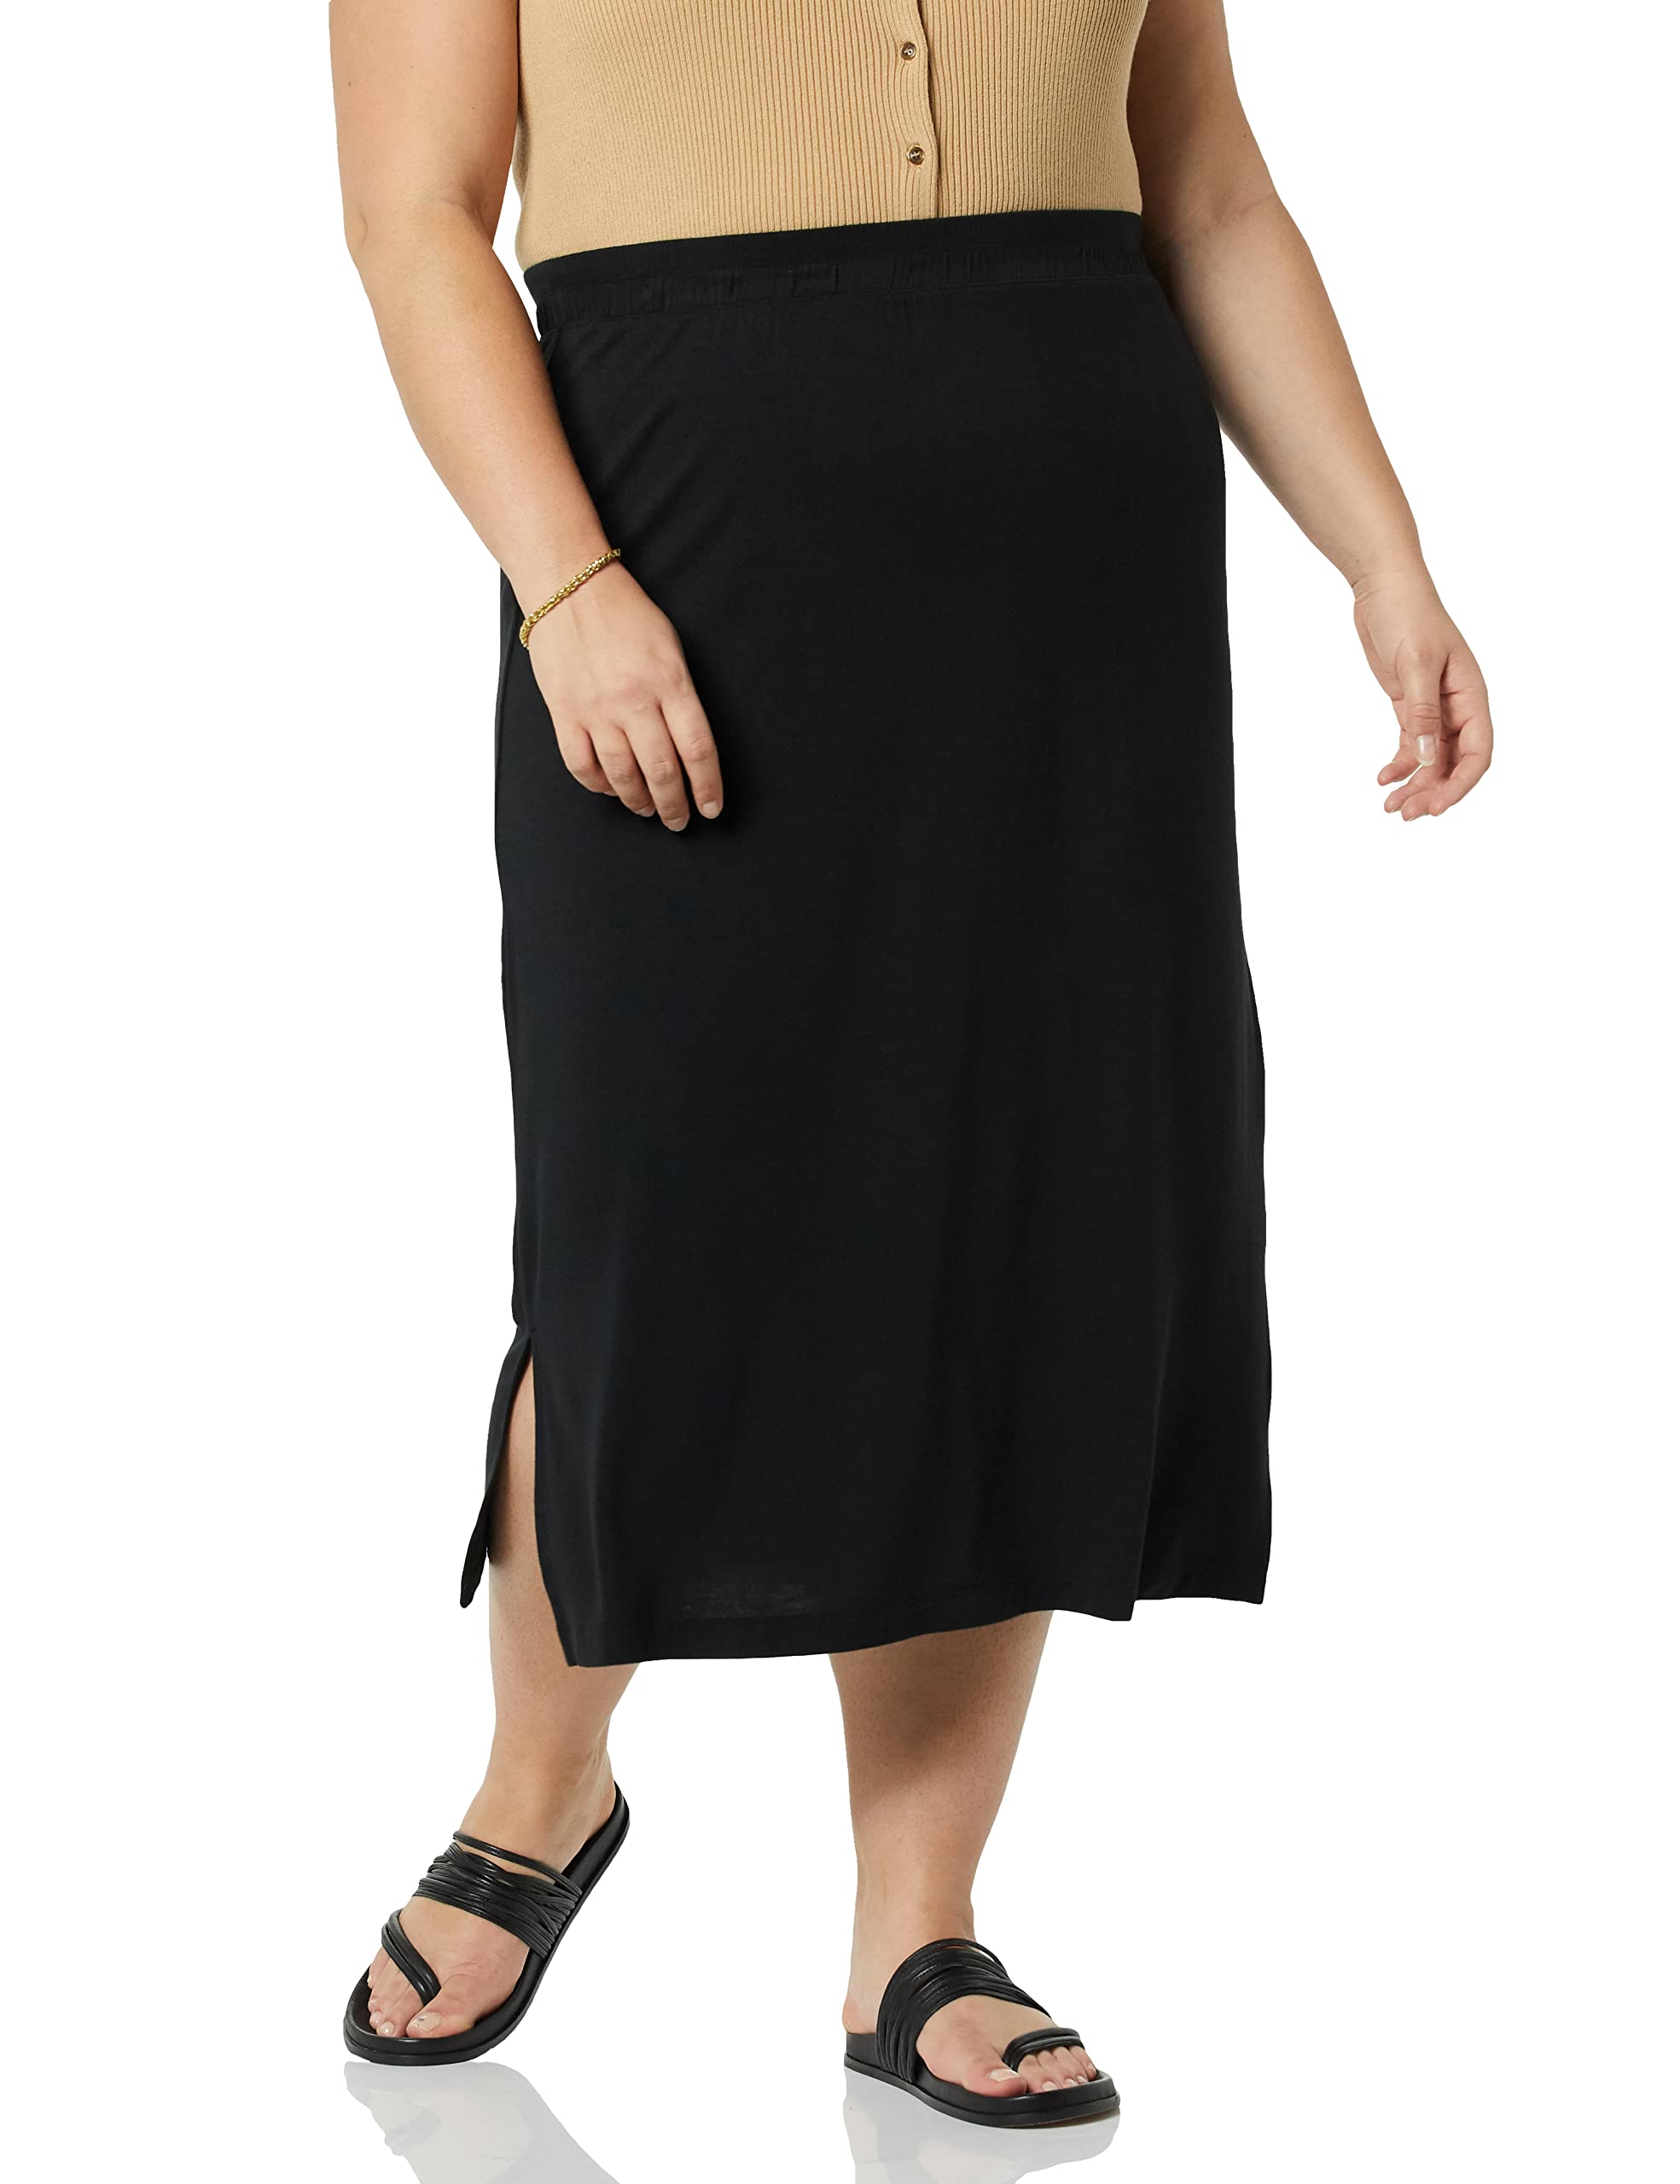 Amazon Essentials Women's Pull-On Knit Midi Skirt (Available in Plus Size)